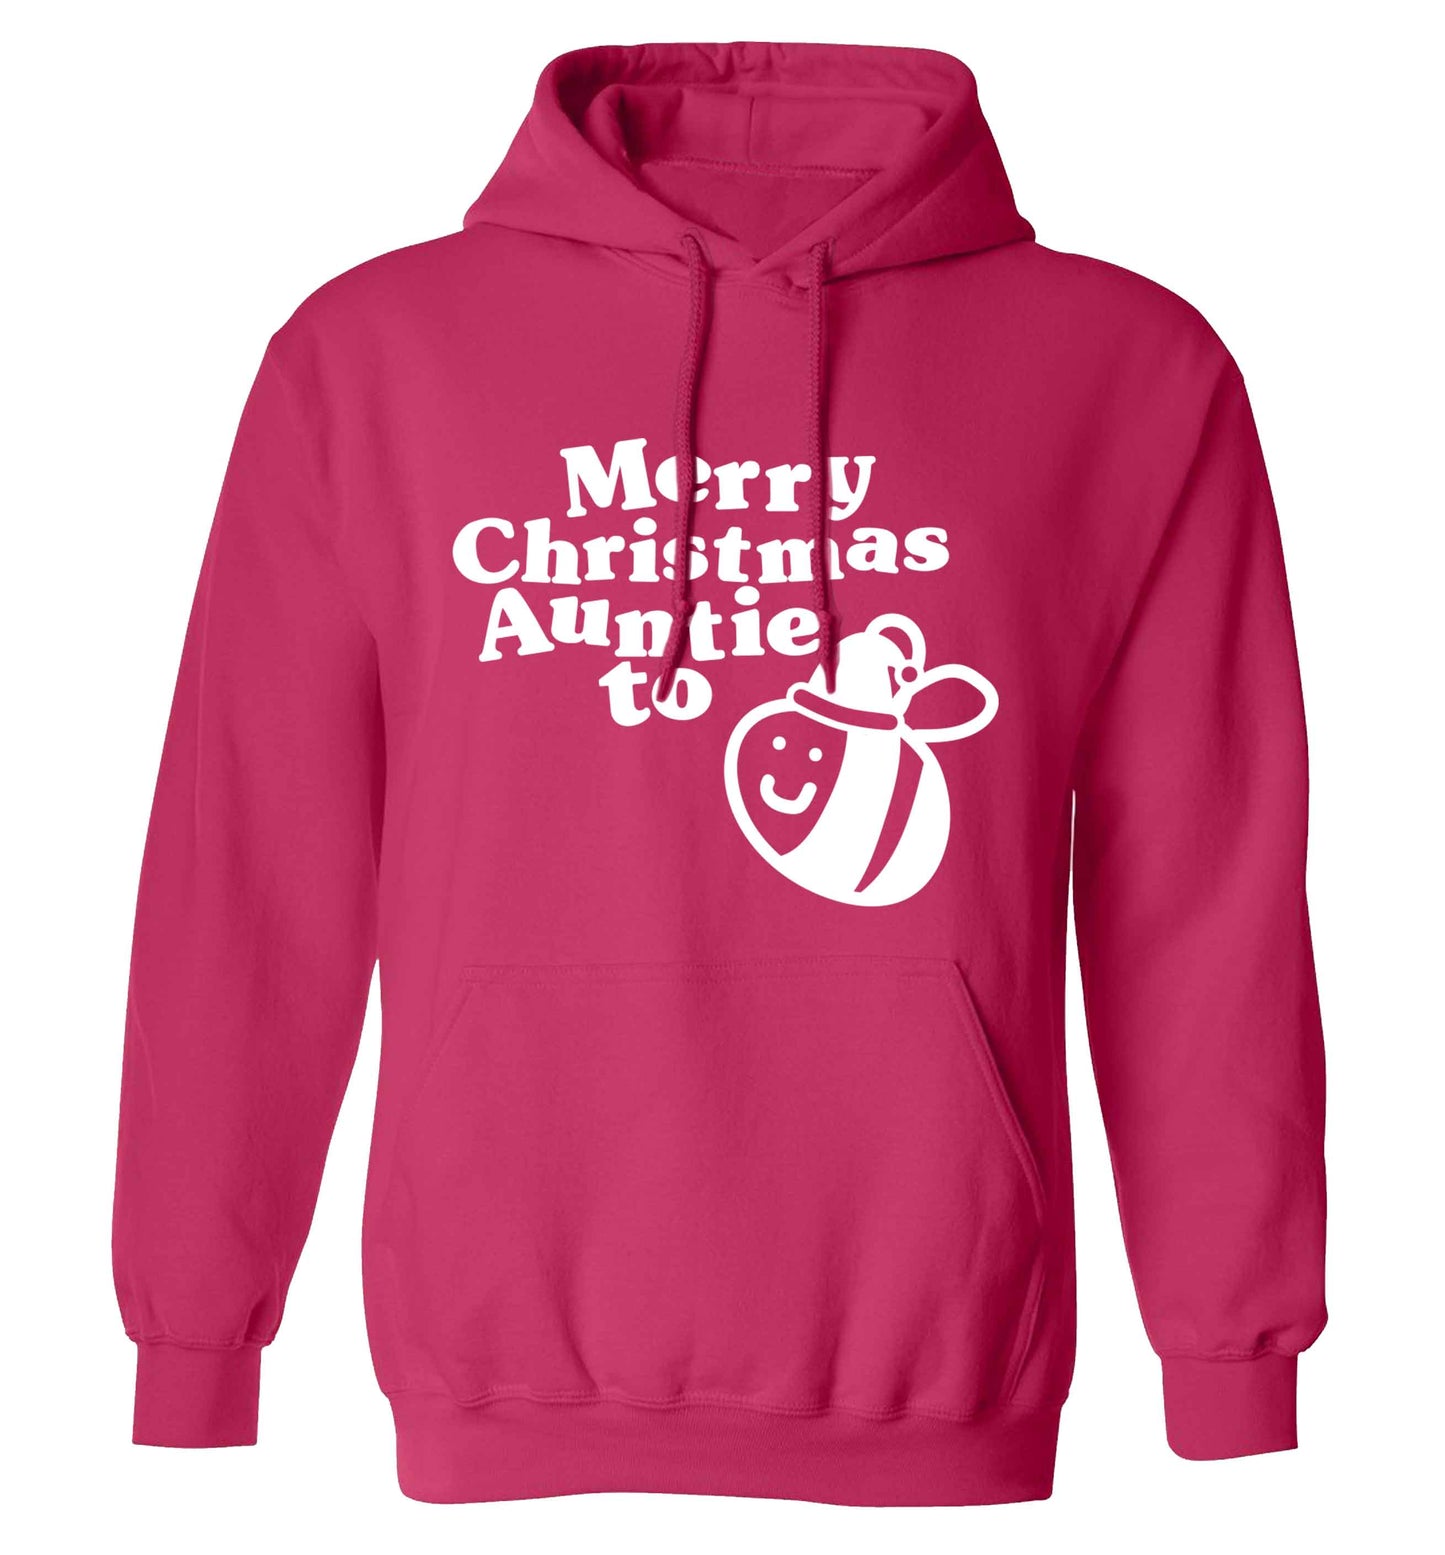 Merry Christmas auntie to be adults unisex pink hoodie 2XL